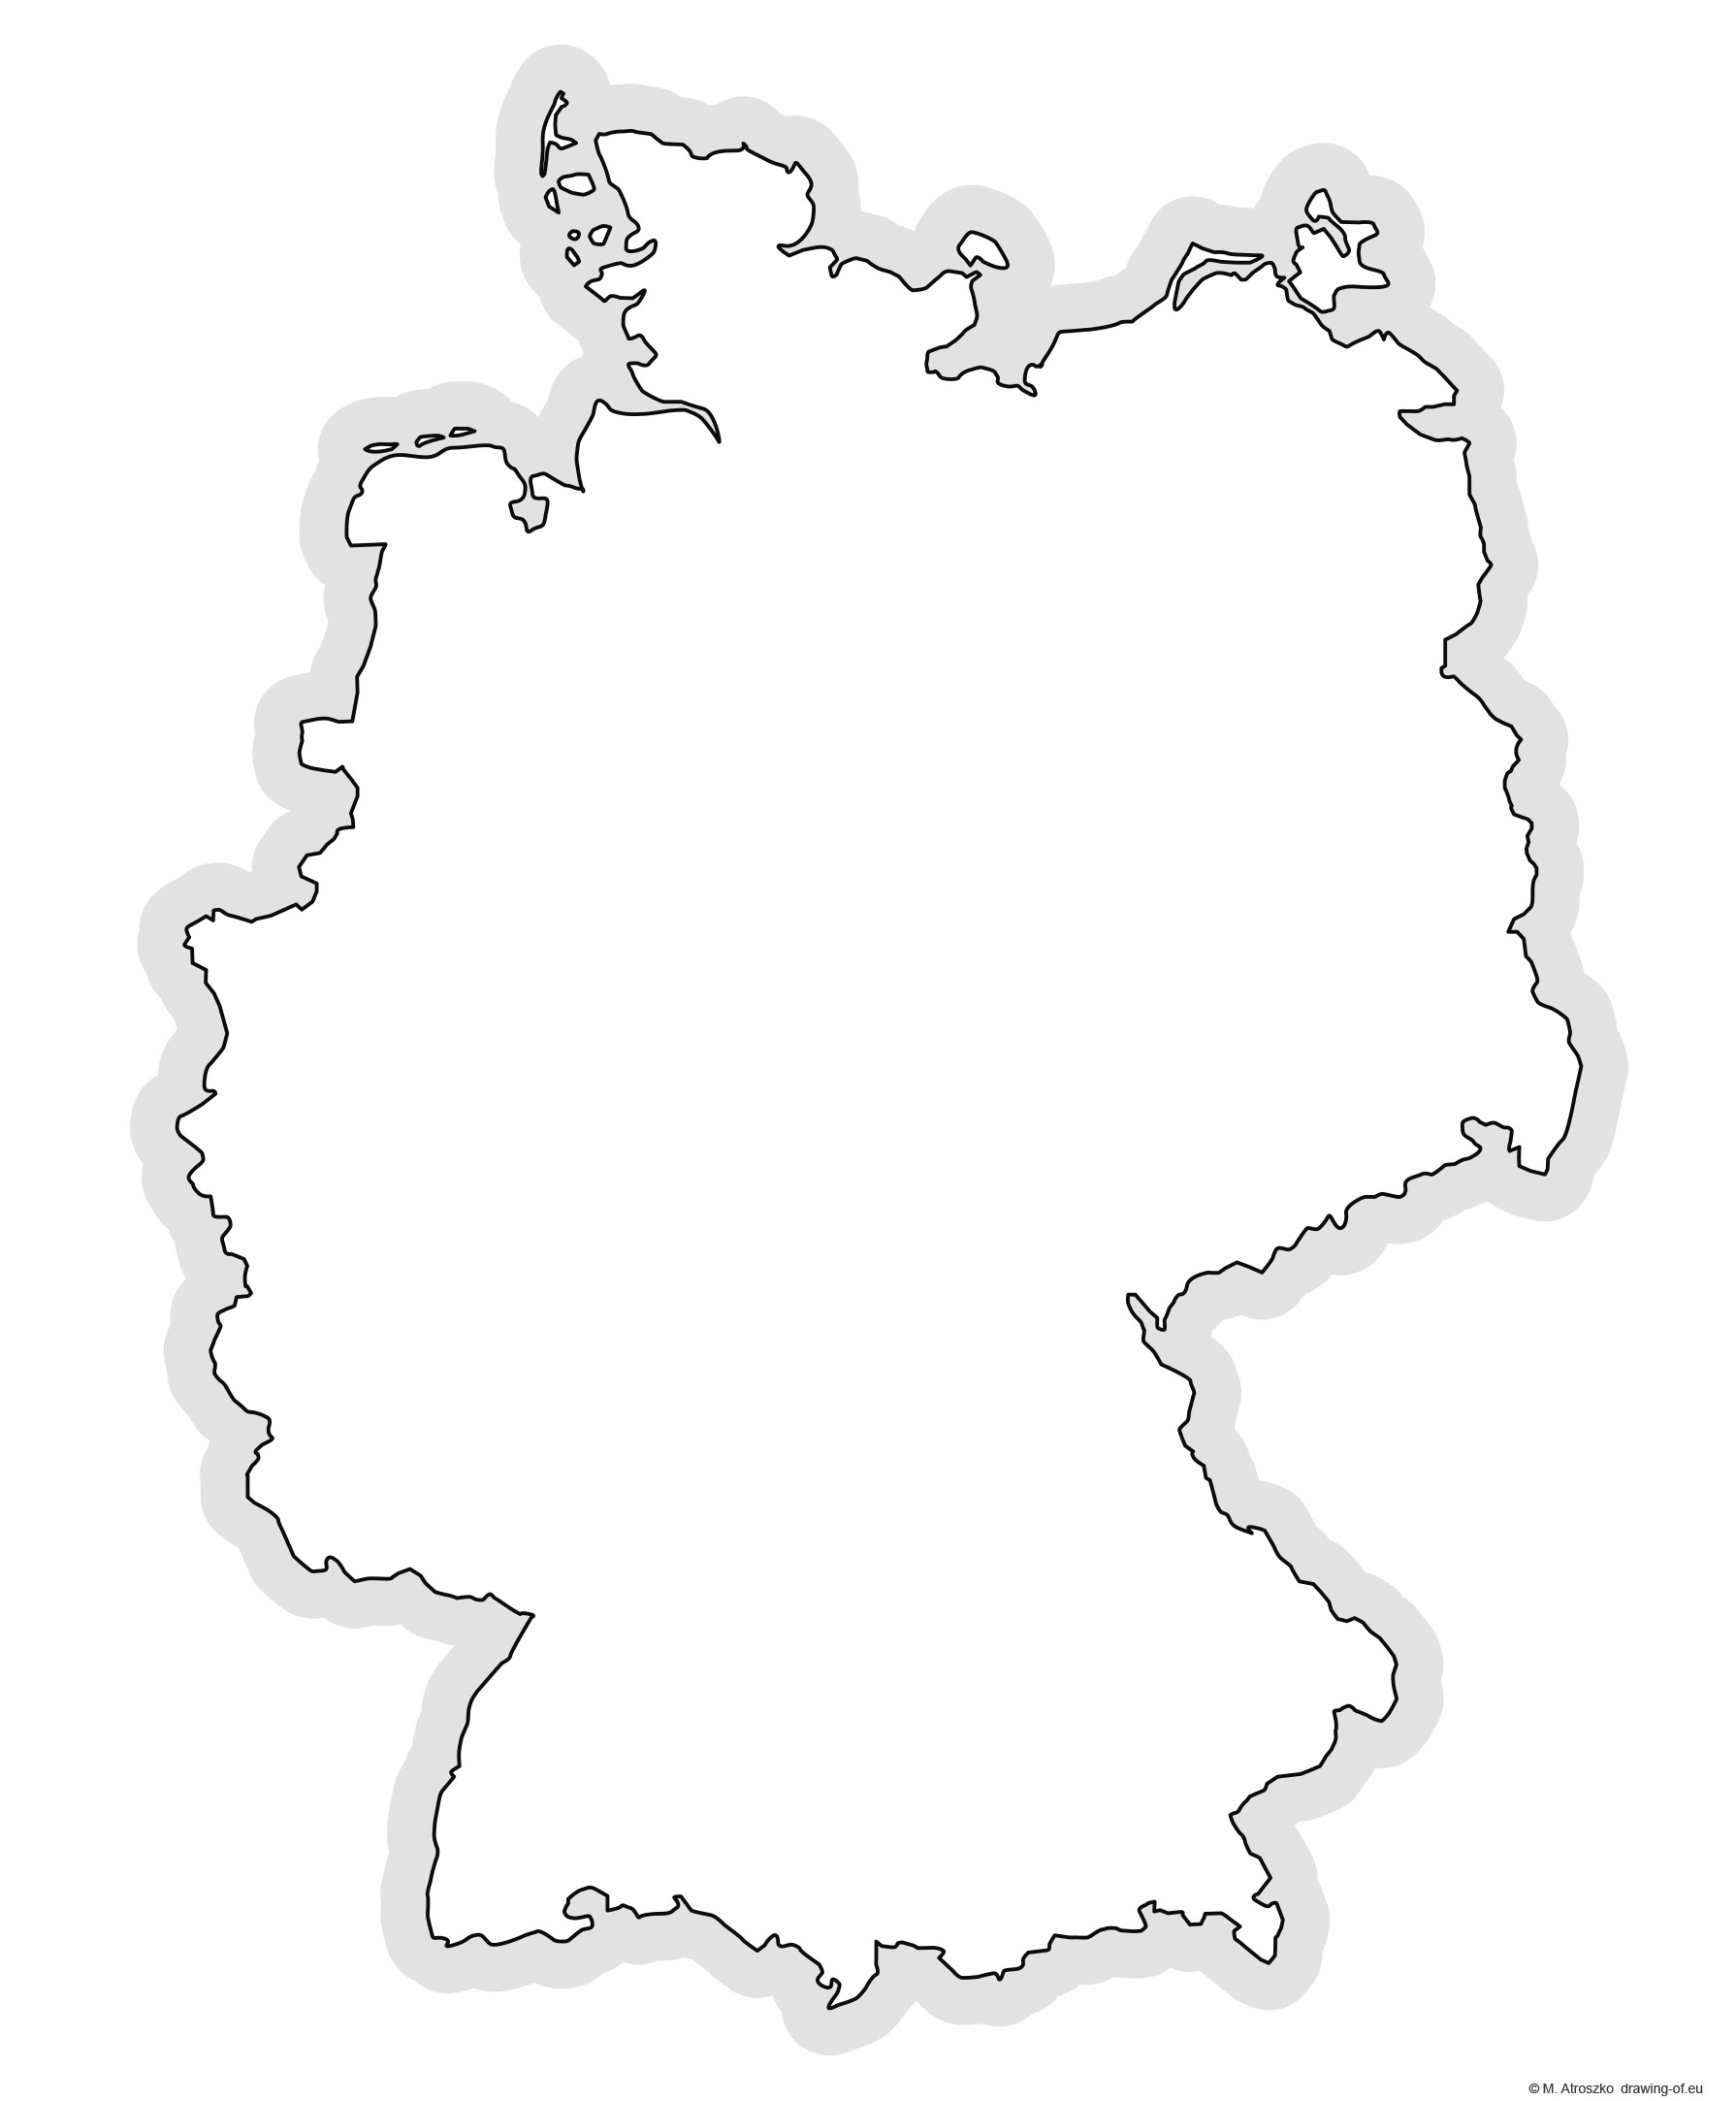 Contour map of Germany